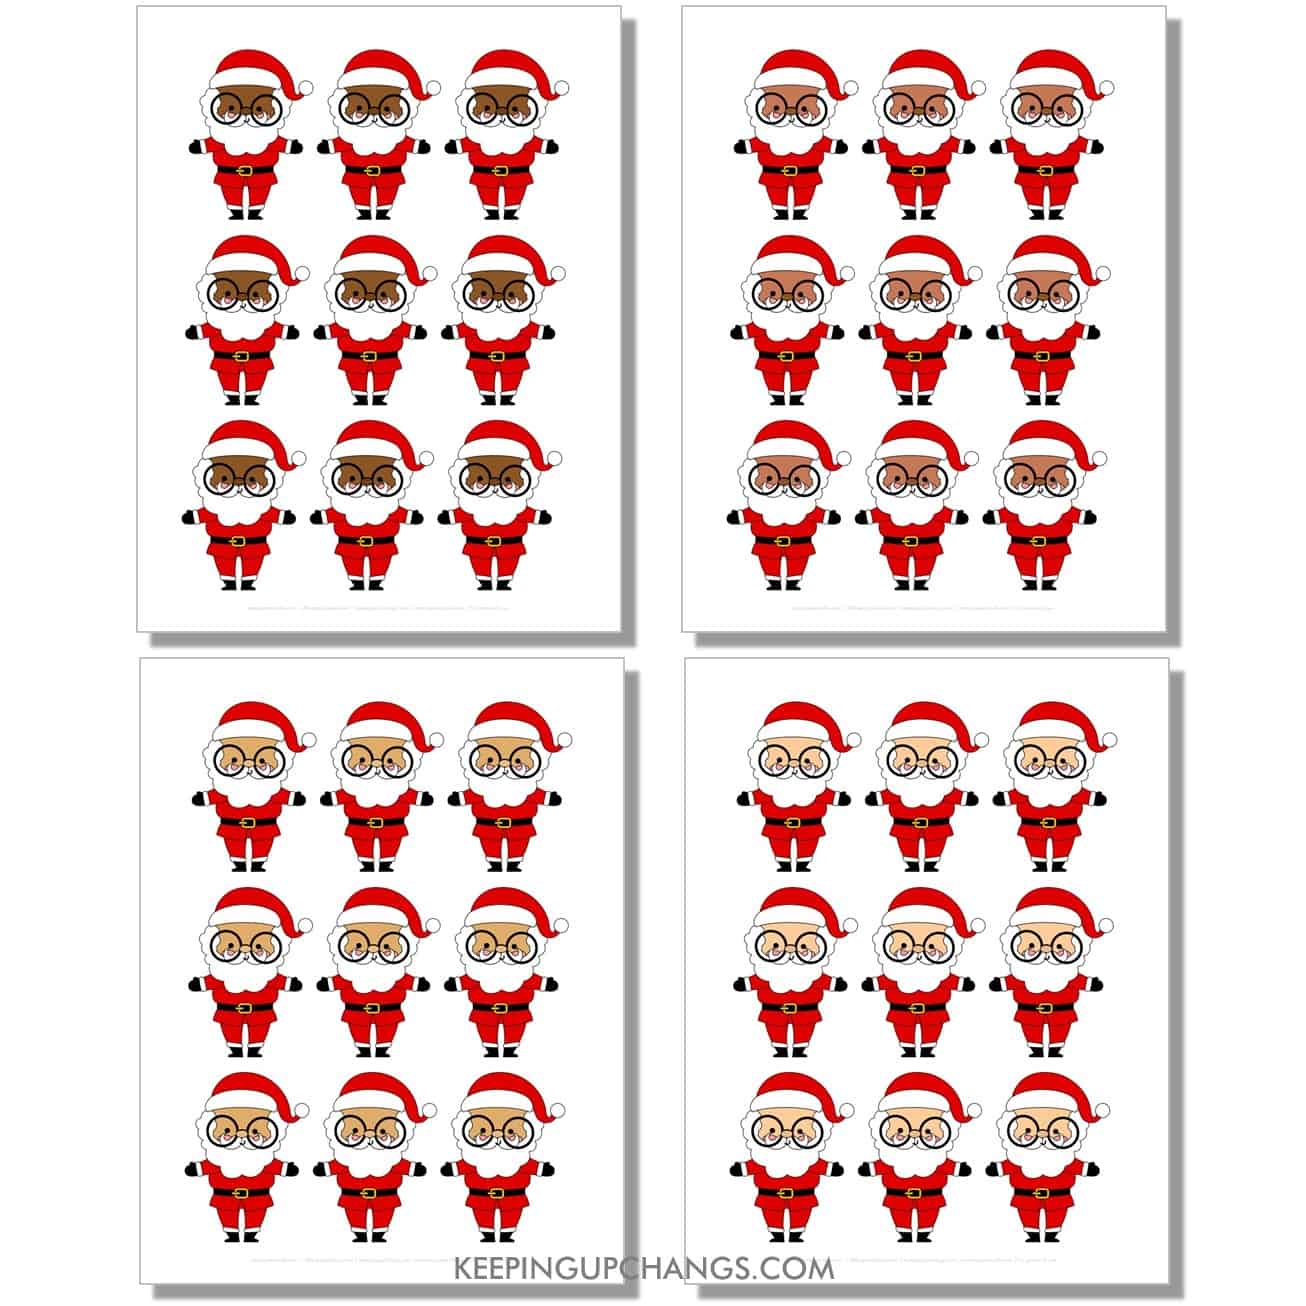 free small, mini glasses santa outline, cut out template in color, red, black, white for light, medium, dark skin tones, races.